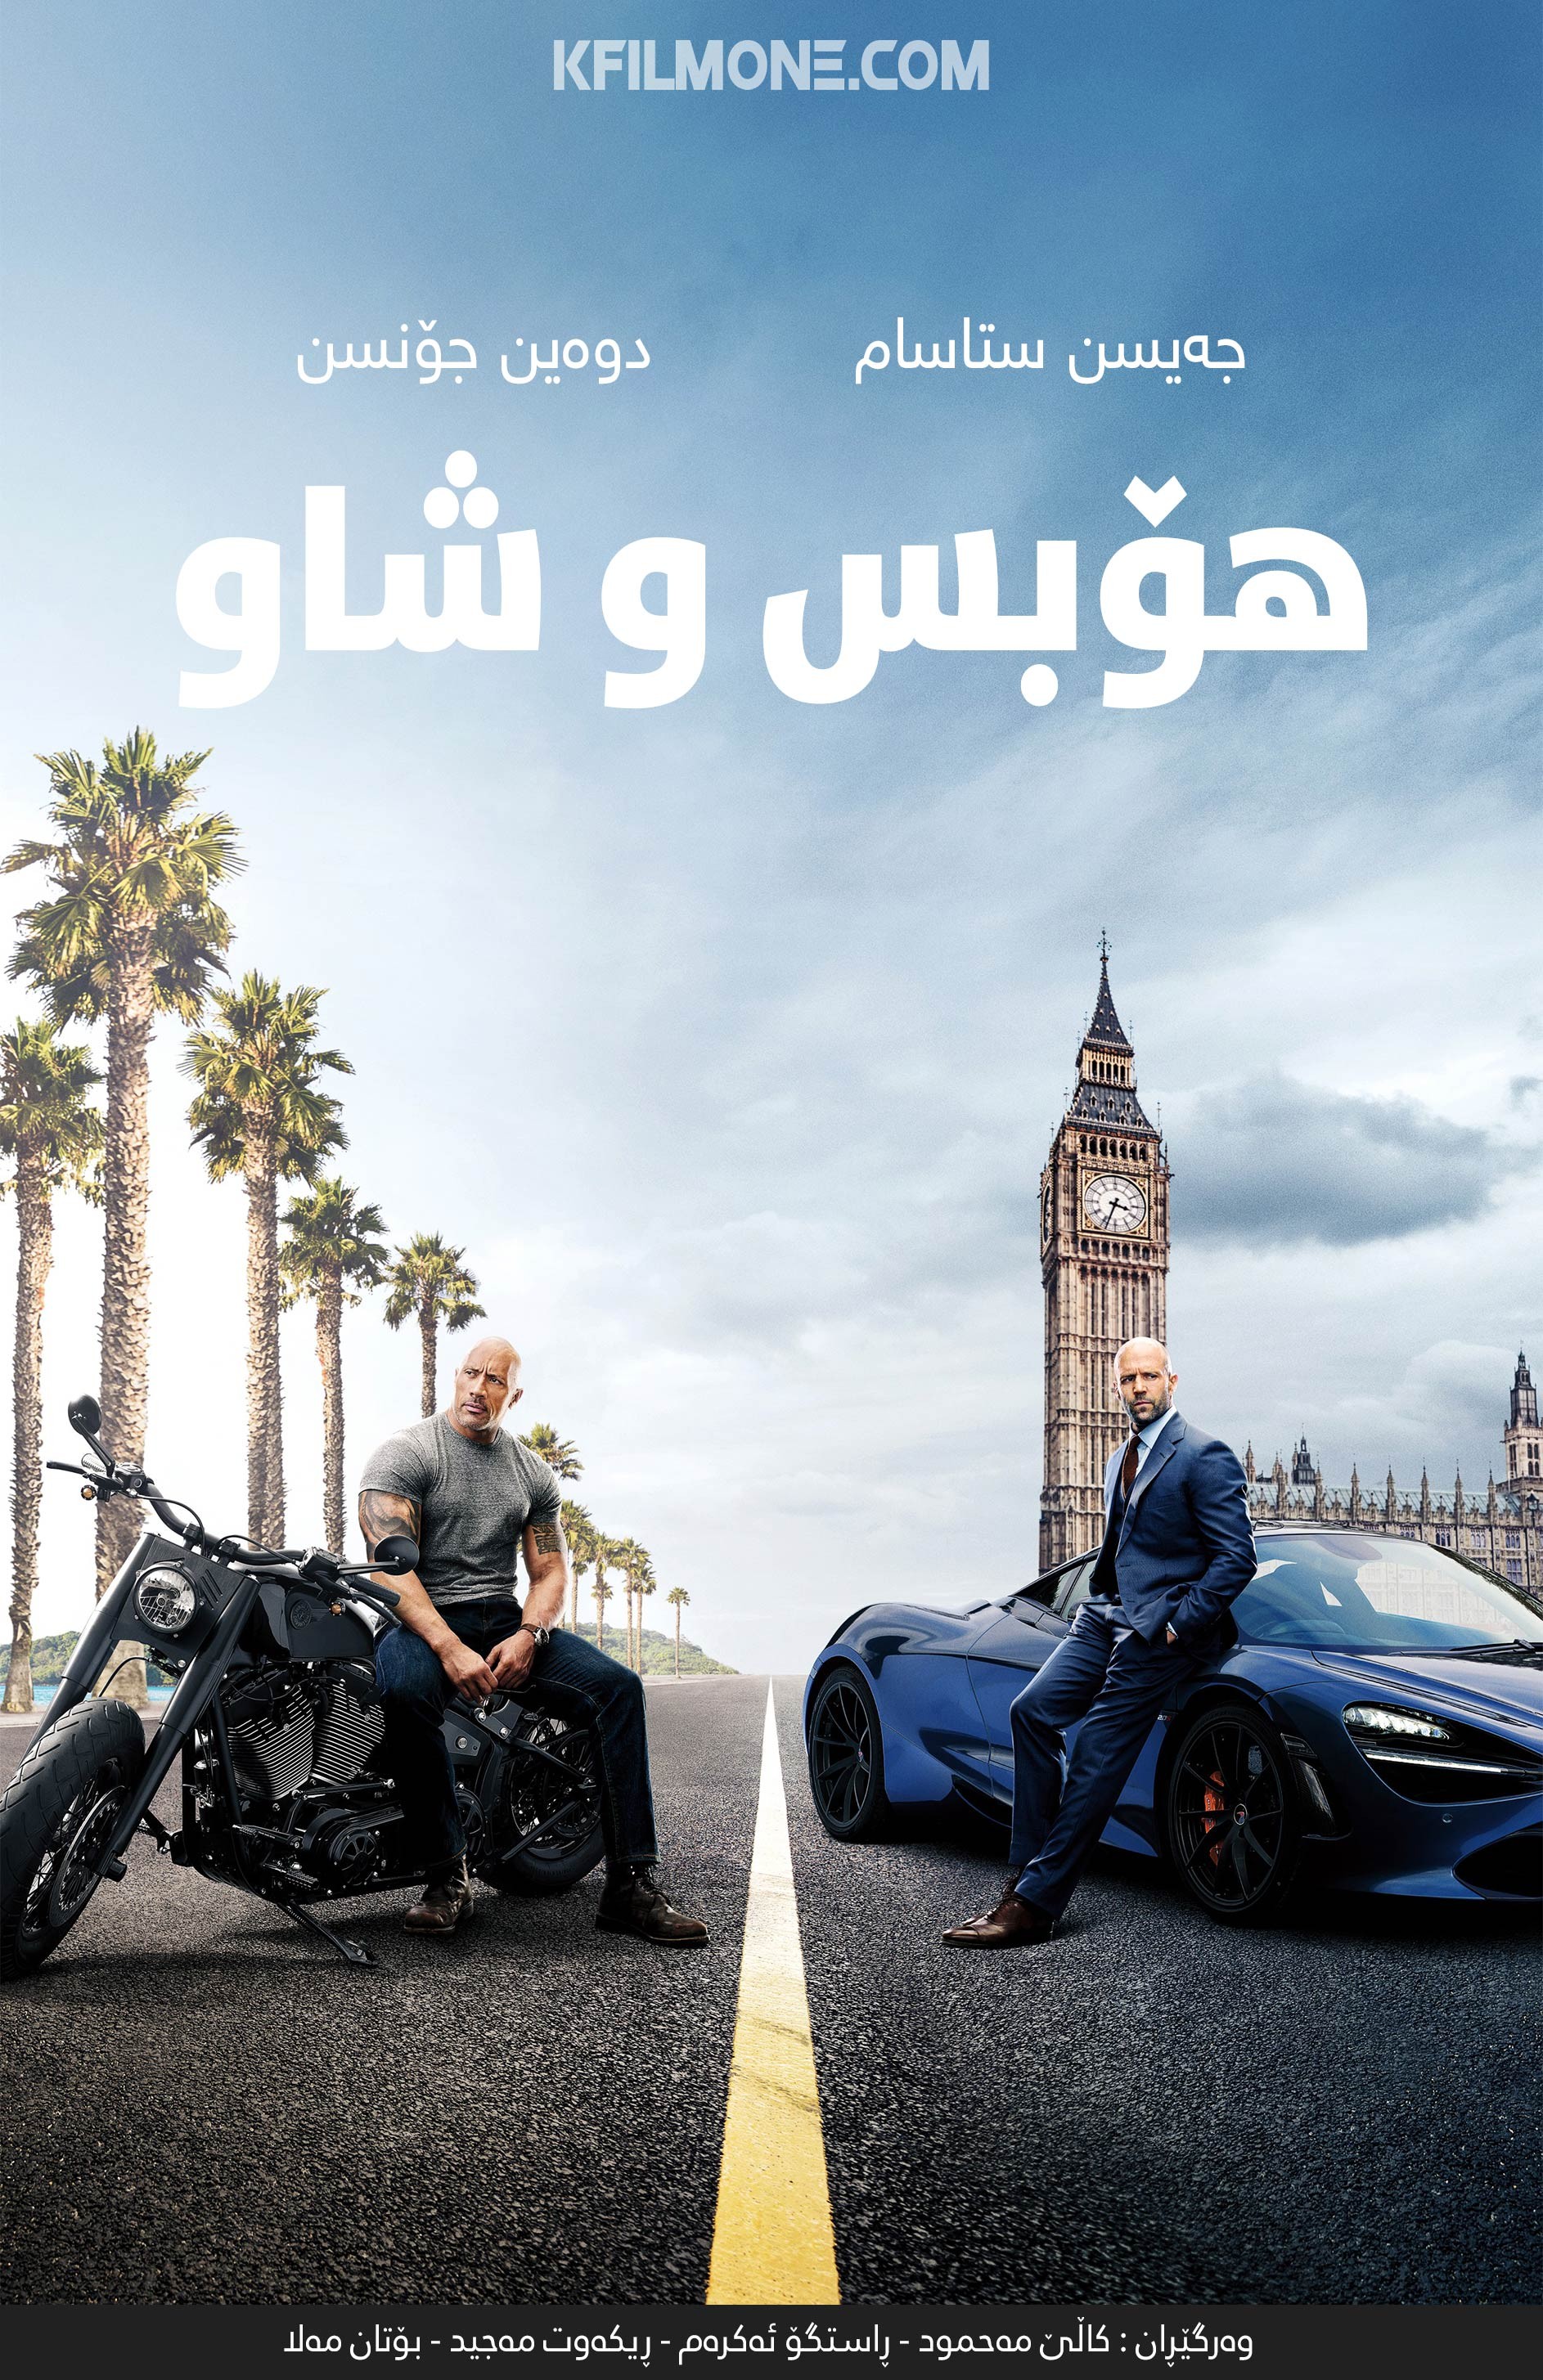 Fast And Furious: Hobbs And Shaw (2019)